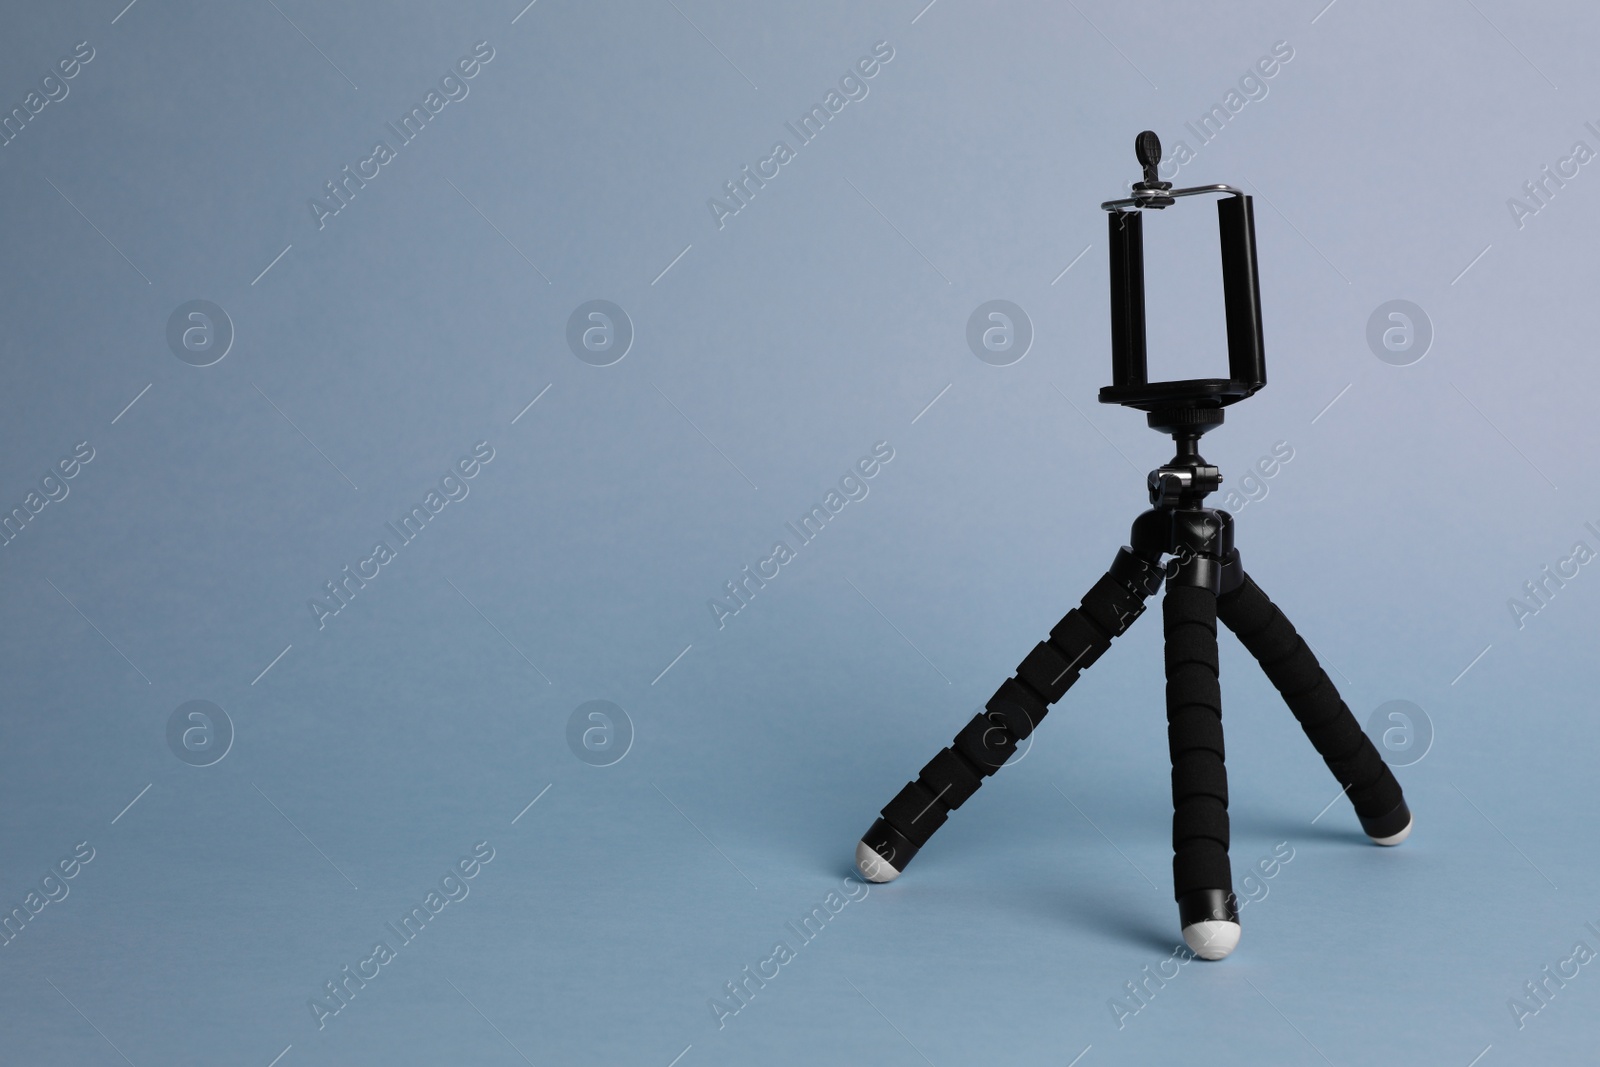 Photo of Modern stylish mobile tripod on light blue background. Space for text